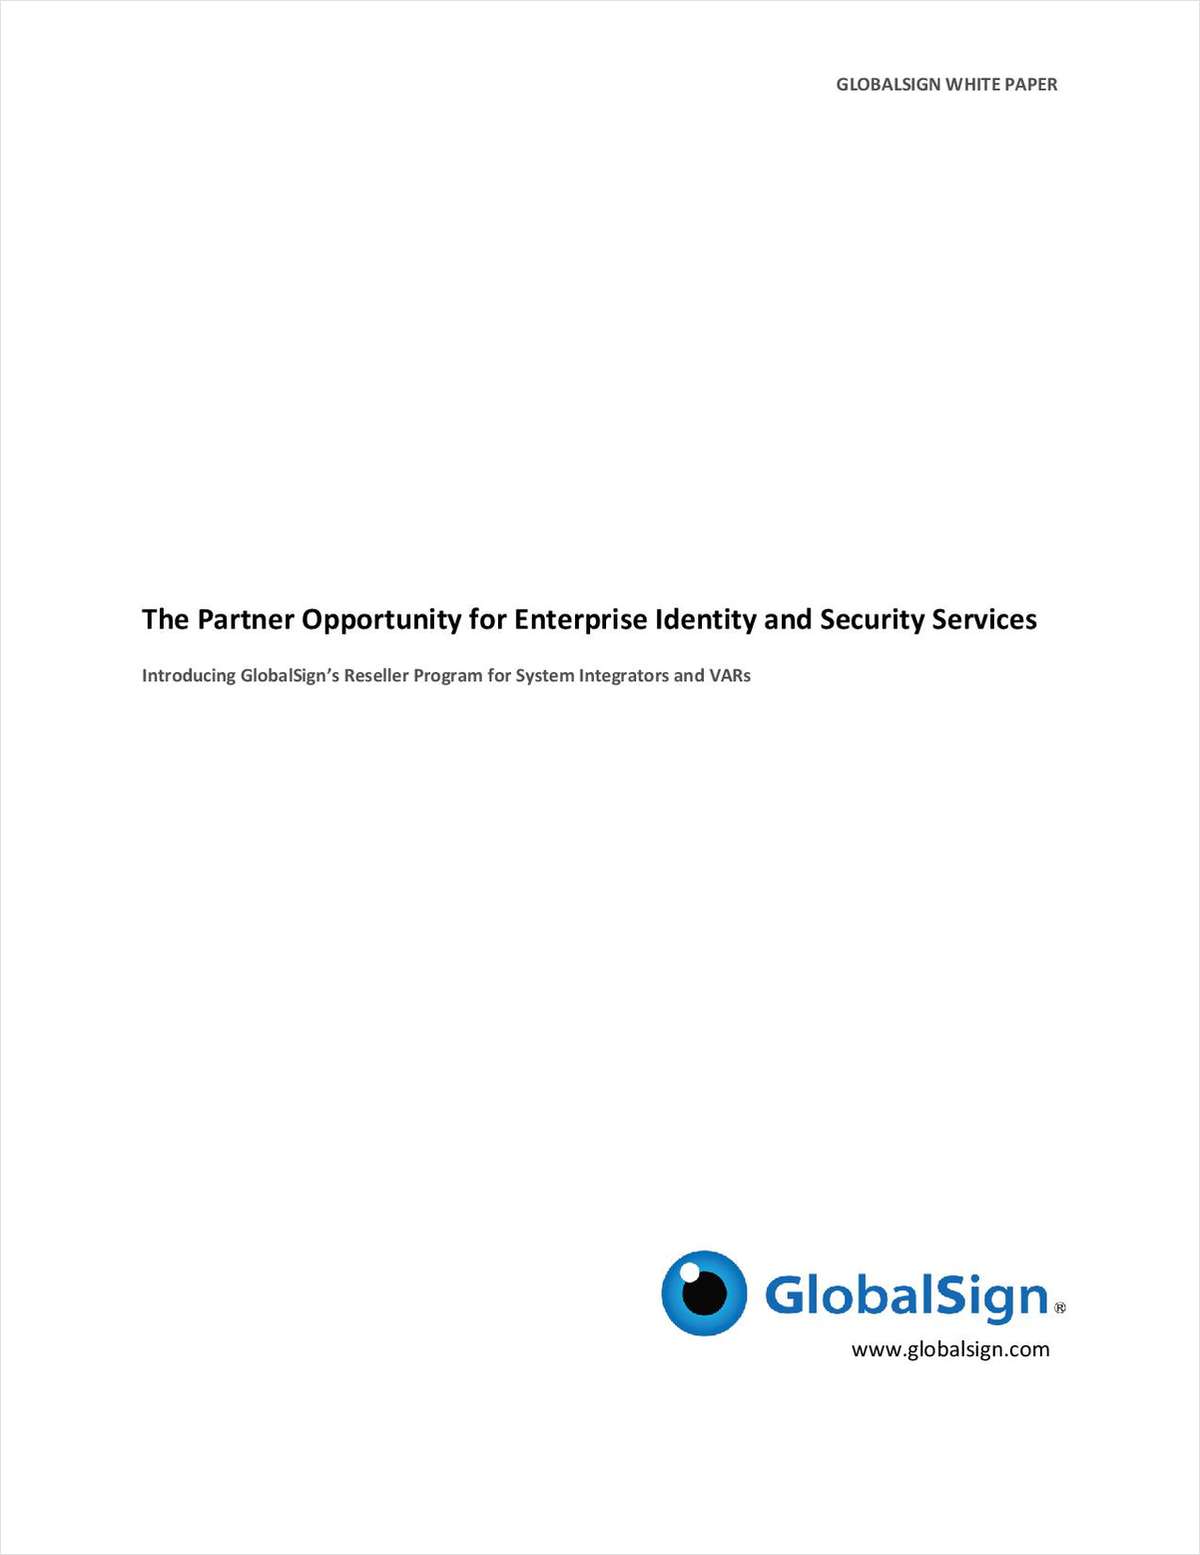 The Partner Opportunity for Enterprise Identity and Security Services